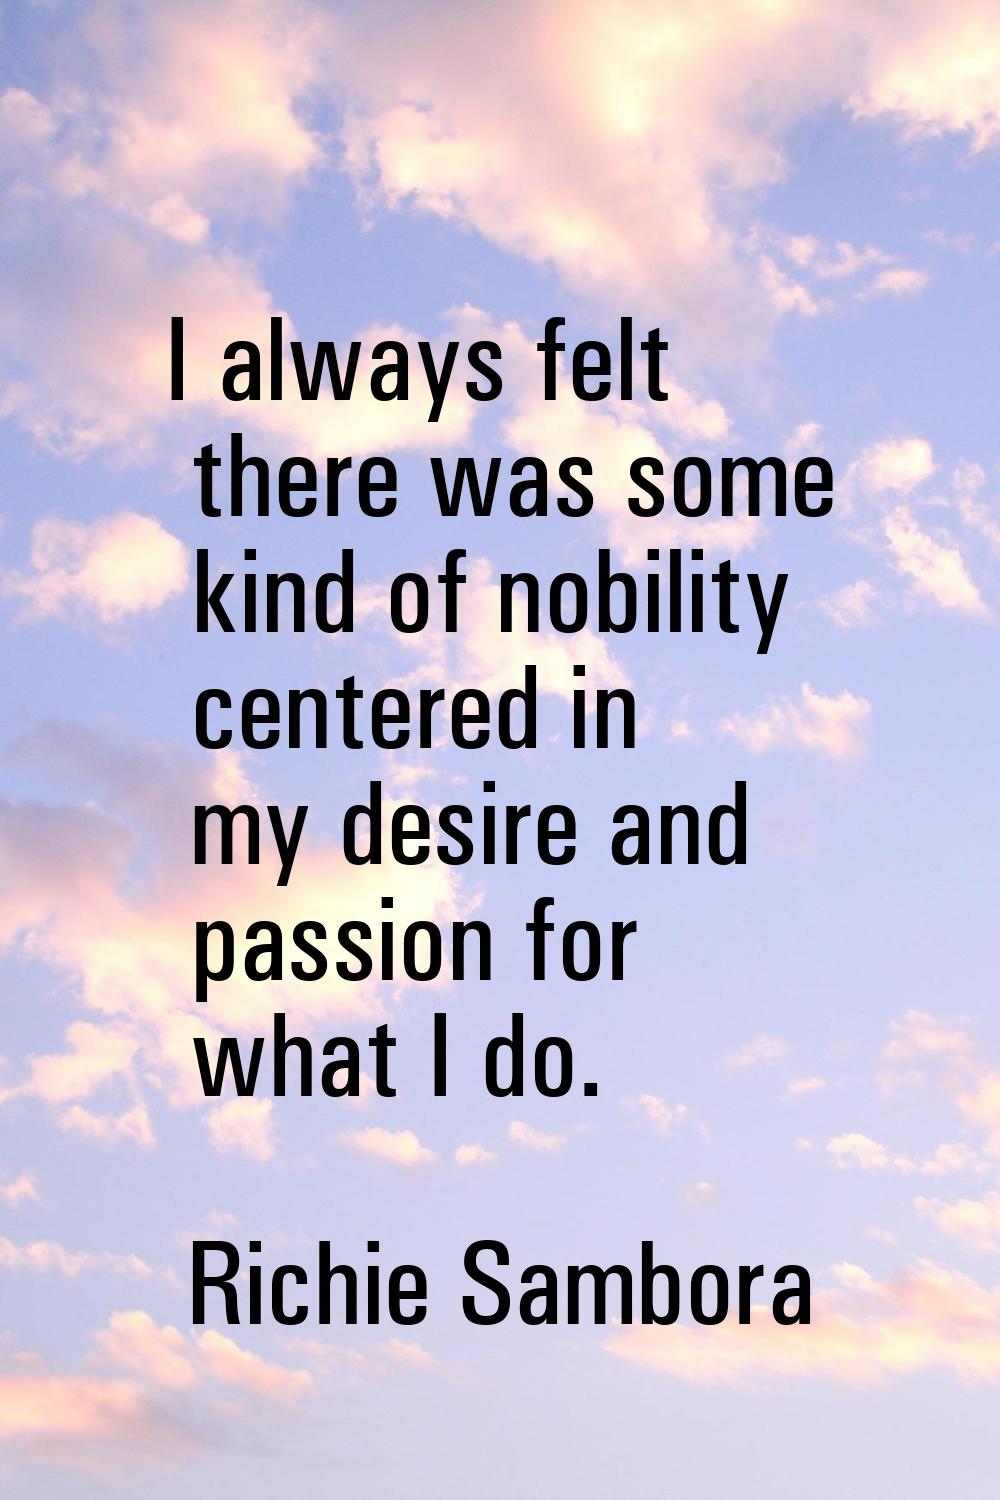 I always felt there was some kind of nobility centered in my desire and passion for what I do.